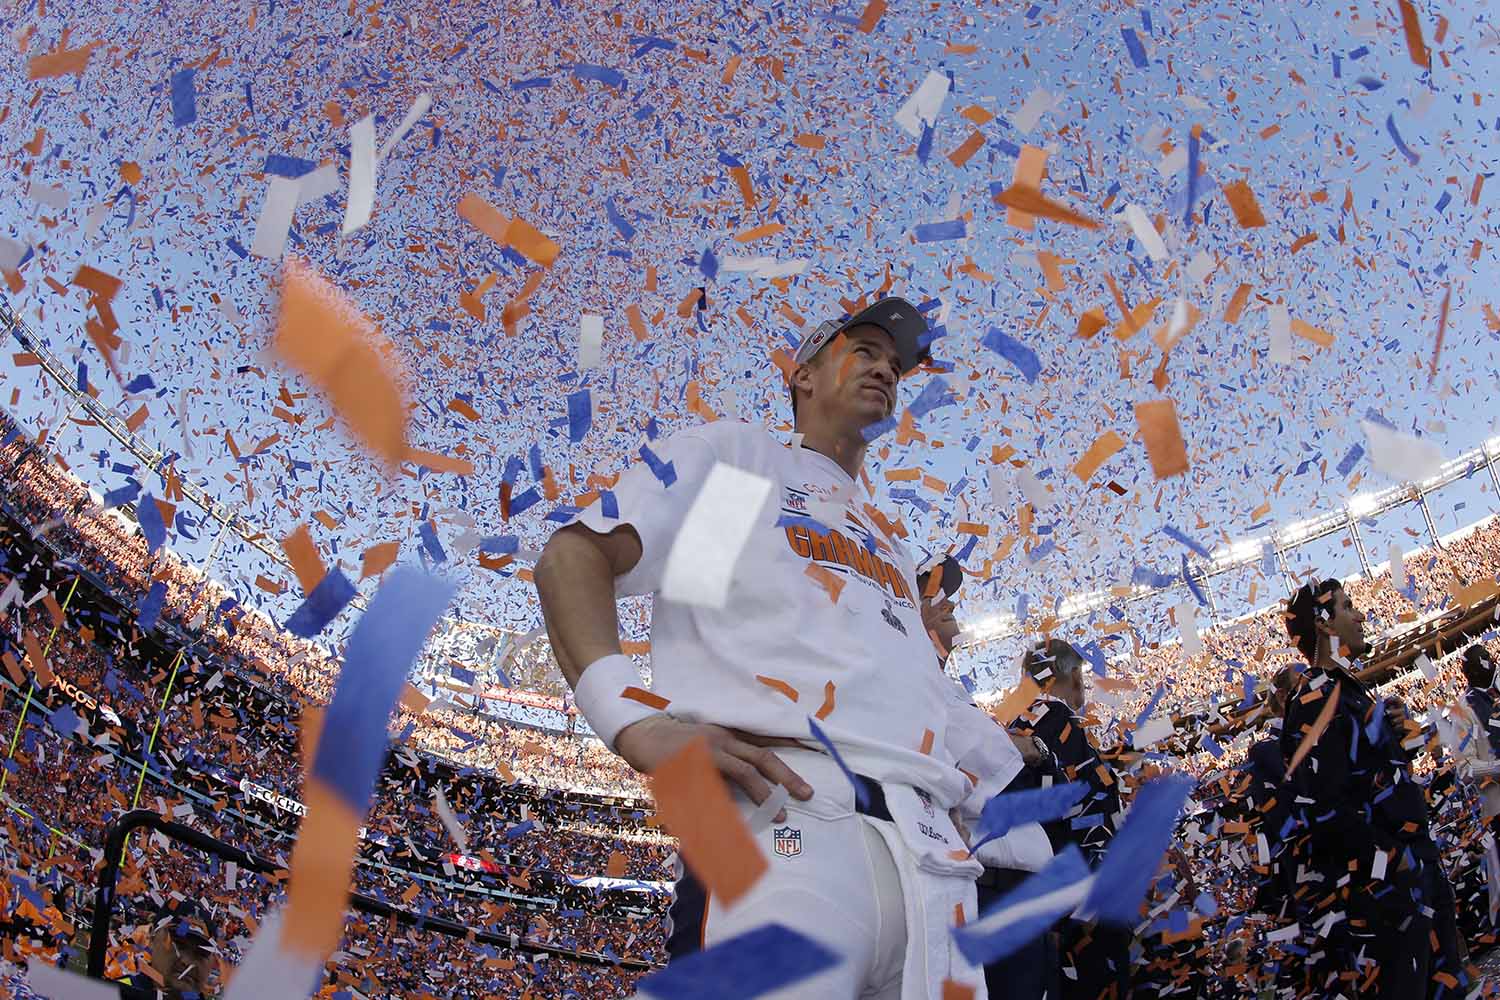 Jan. 19, 2014. Denver Broncos quarterback Peyton Manning is engulfed in confetti during the trophy ceremony after the AFC Championship NFL playoff football game in Denver, Col.